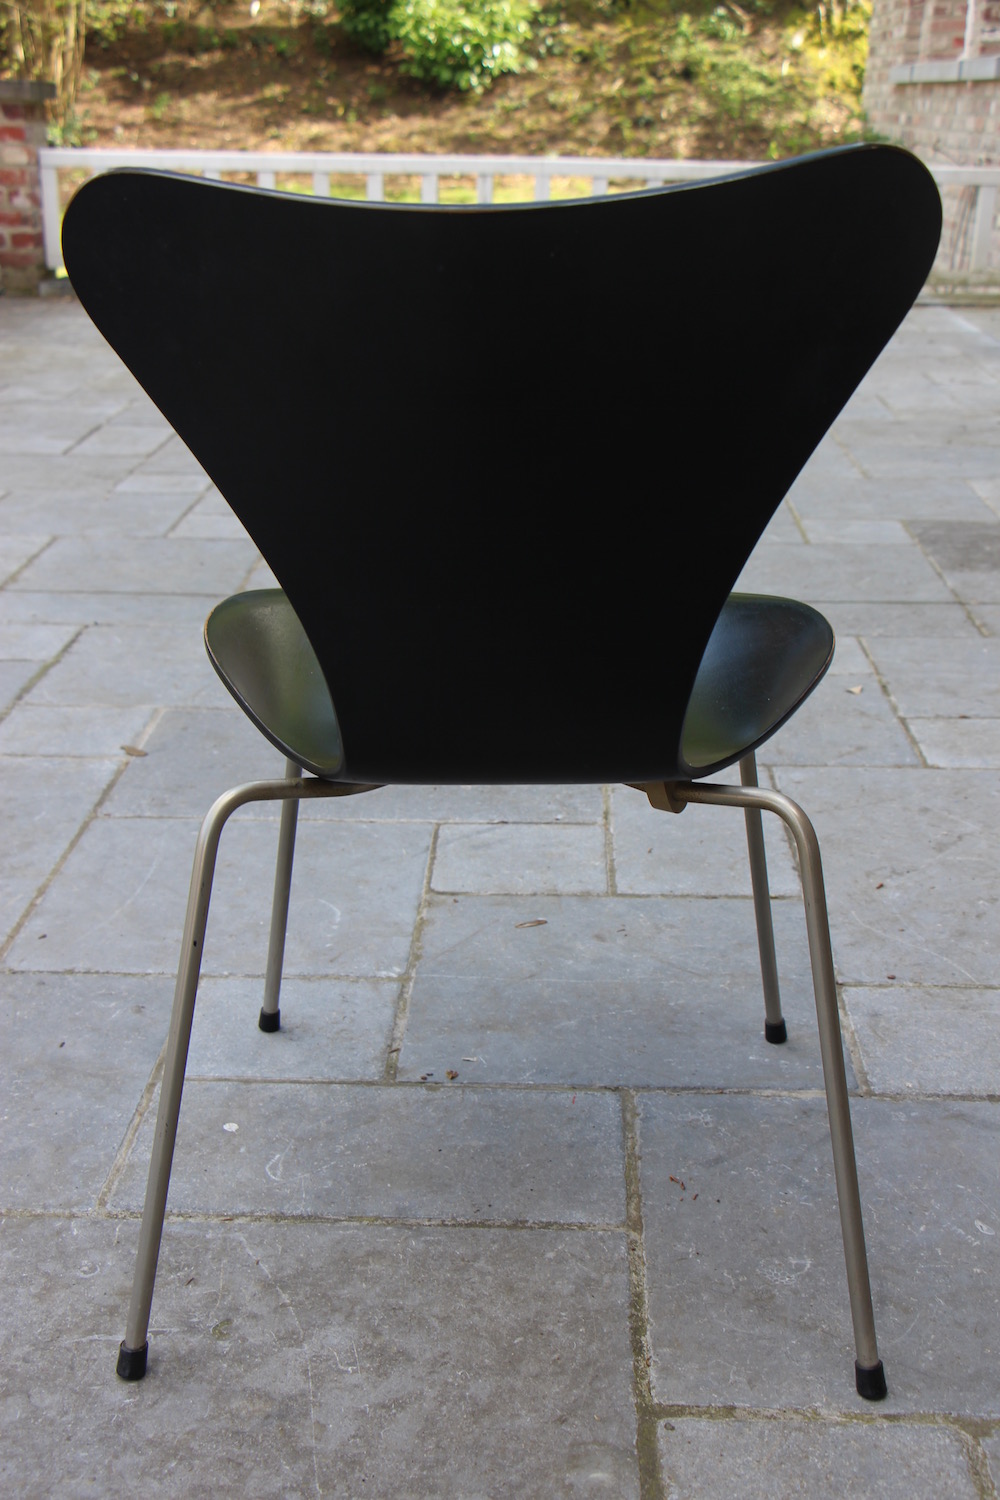 Vintage Butterfly chair by Arne Jacobsen for Fritz Hansen